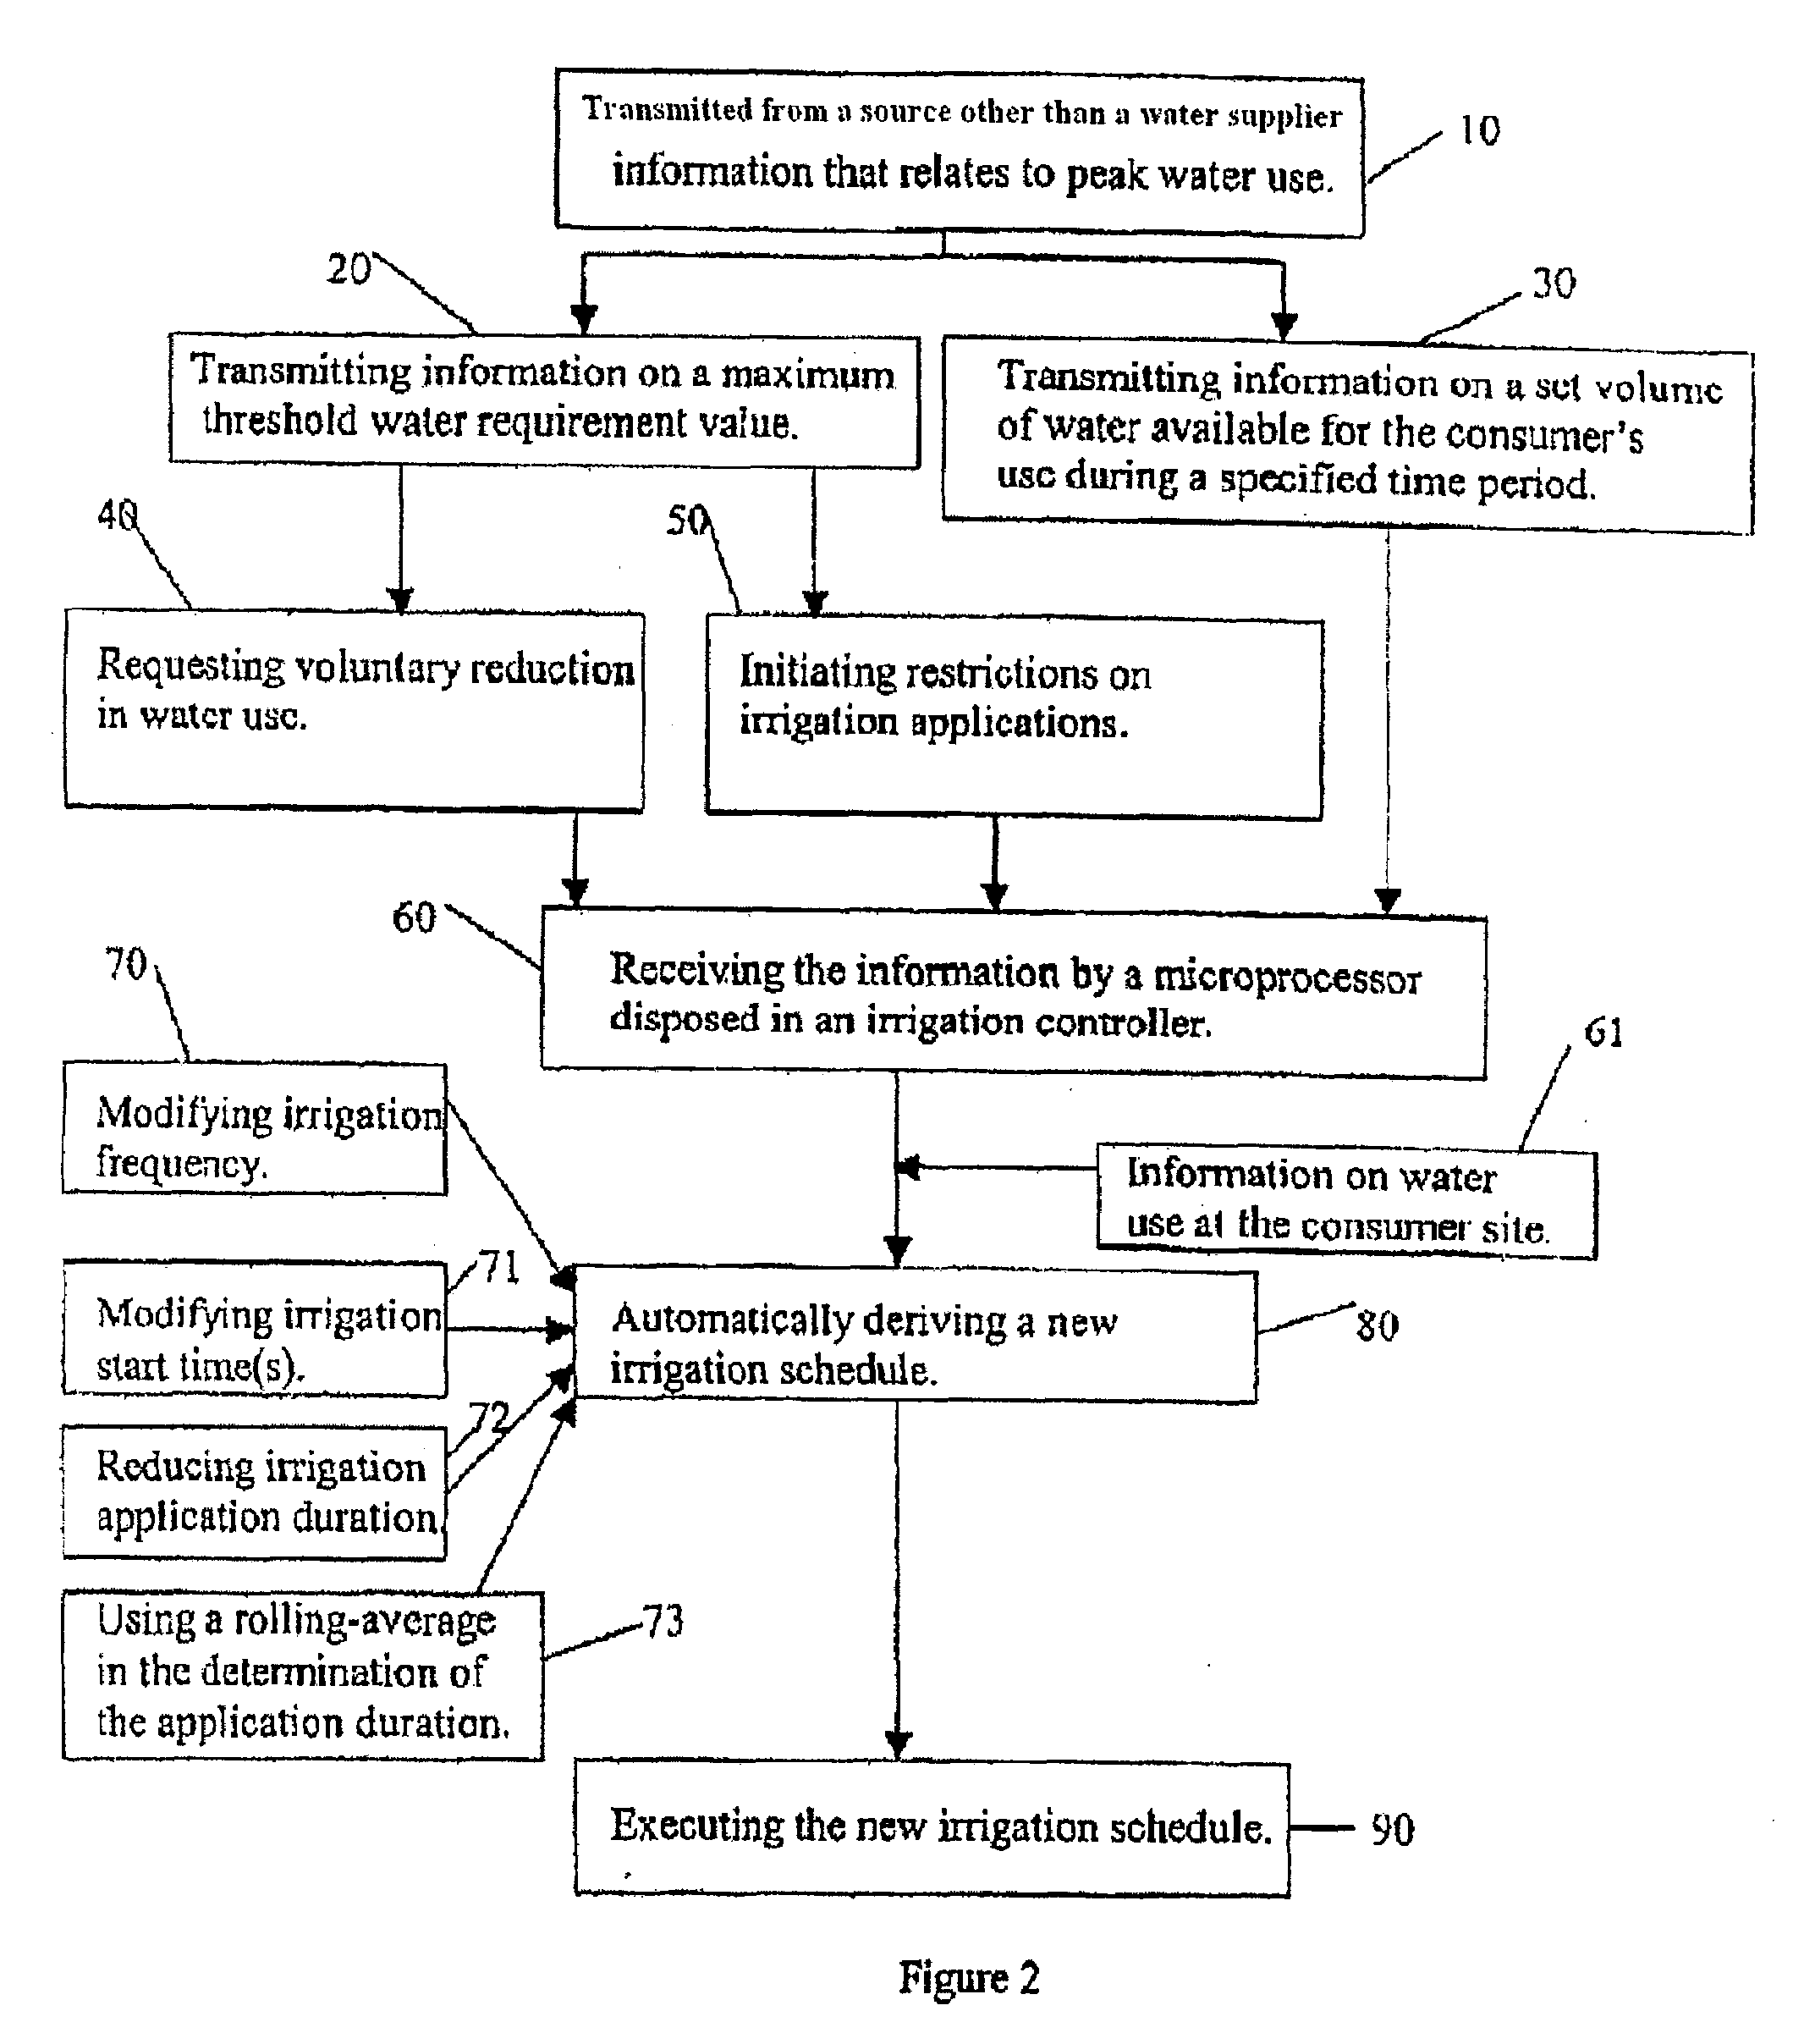 Systems and Methods of Reducing Peak Water Usage